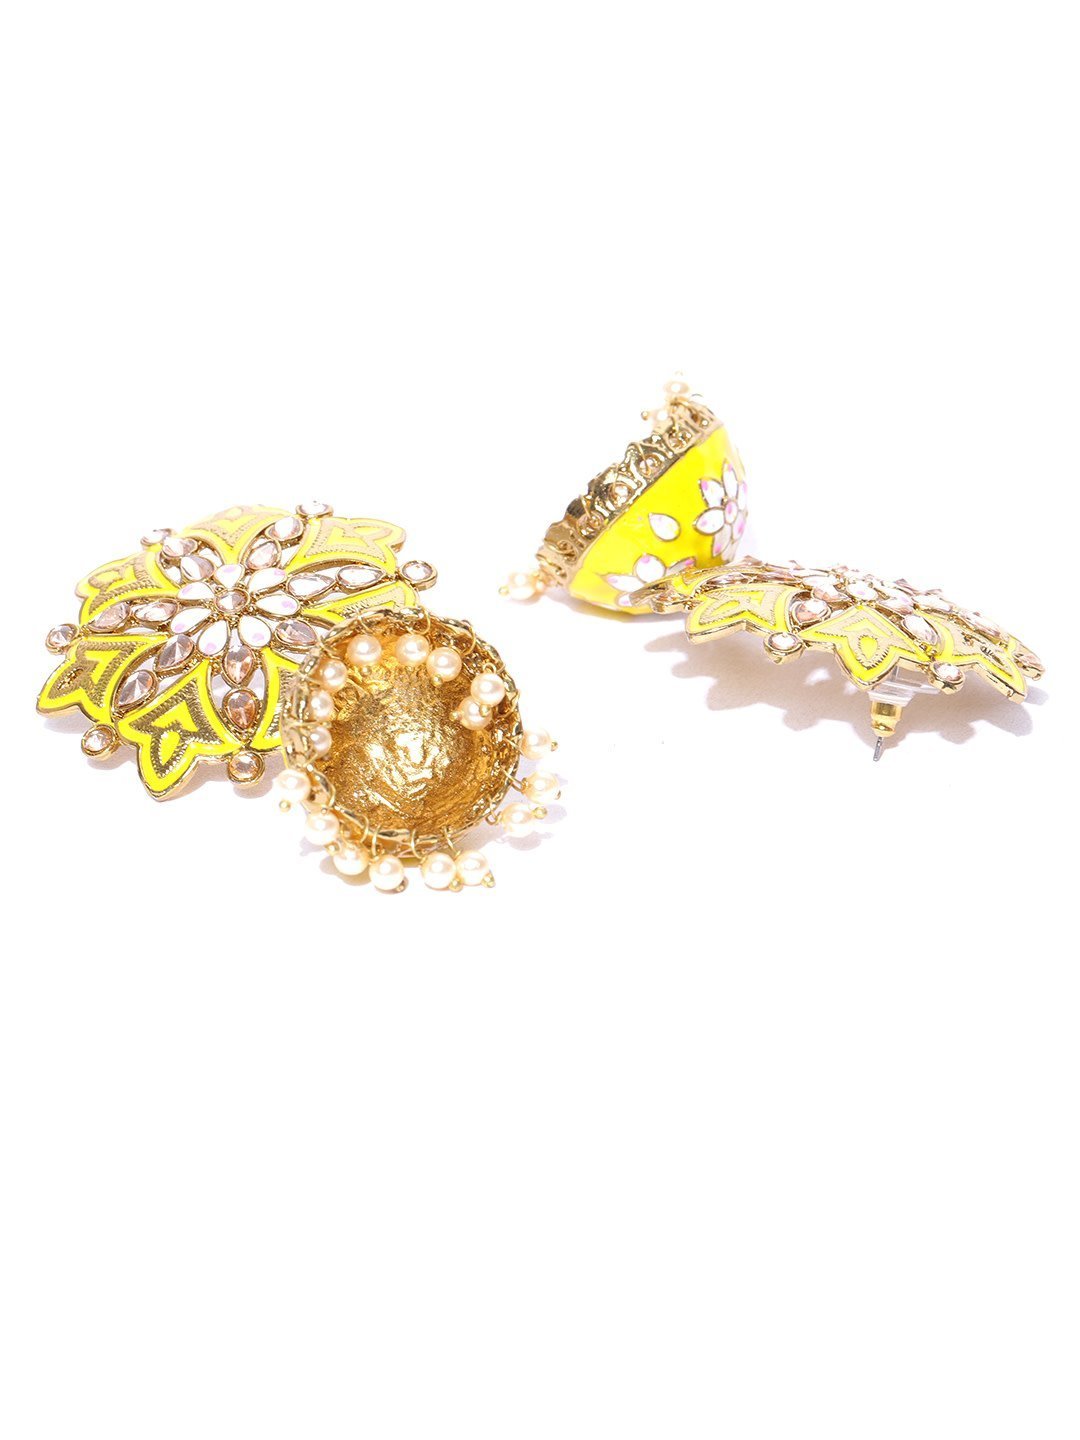 Women's Classic Floral Shaped Yellow Jhumka Earring For Women And Girls - Priyaasi